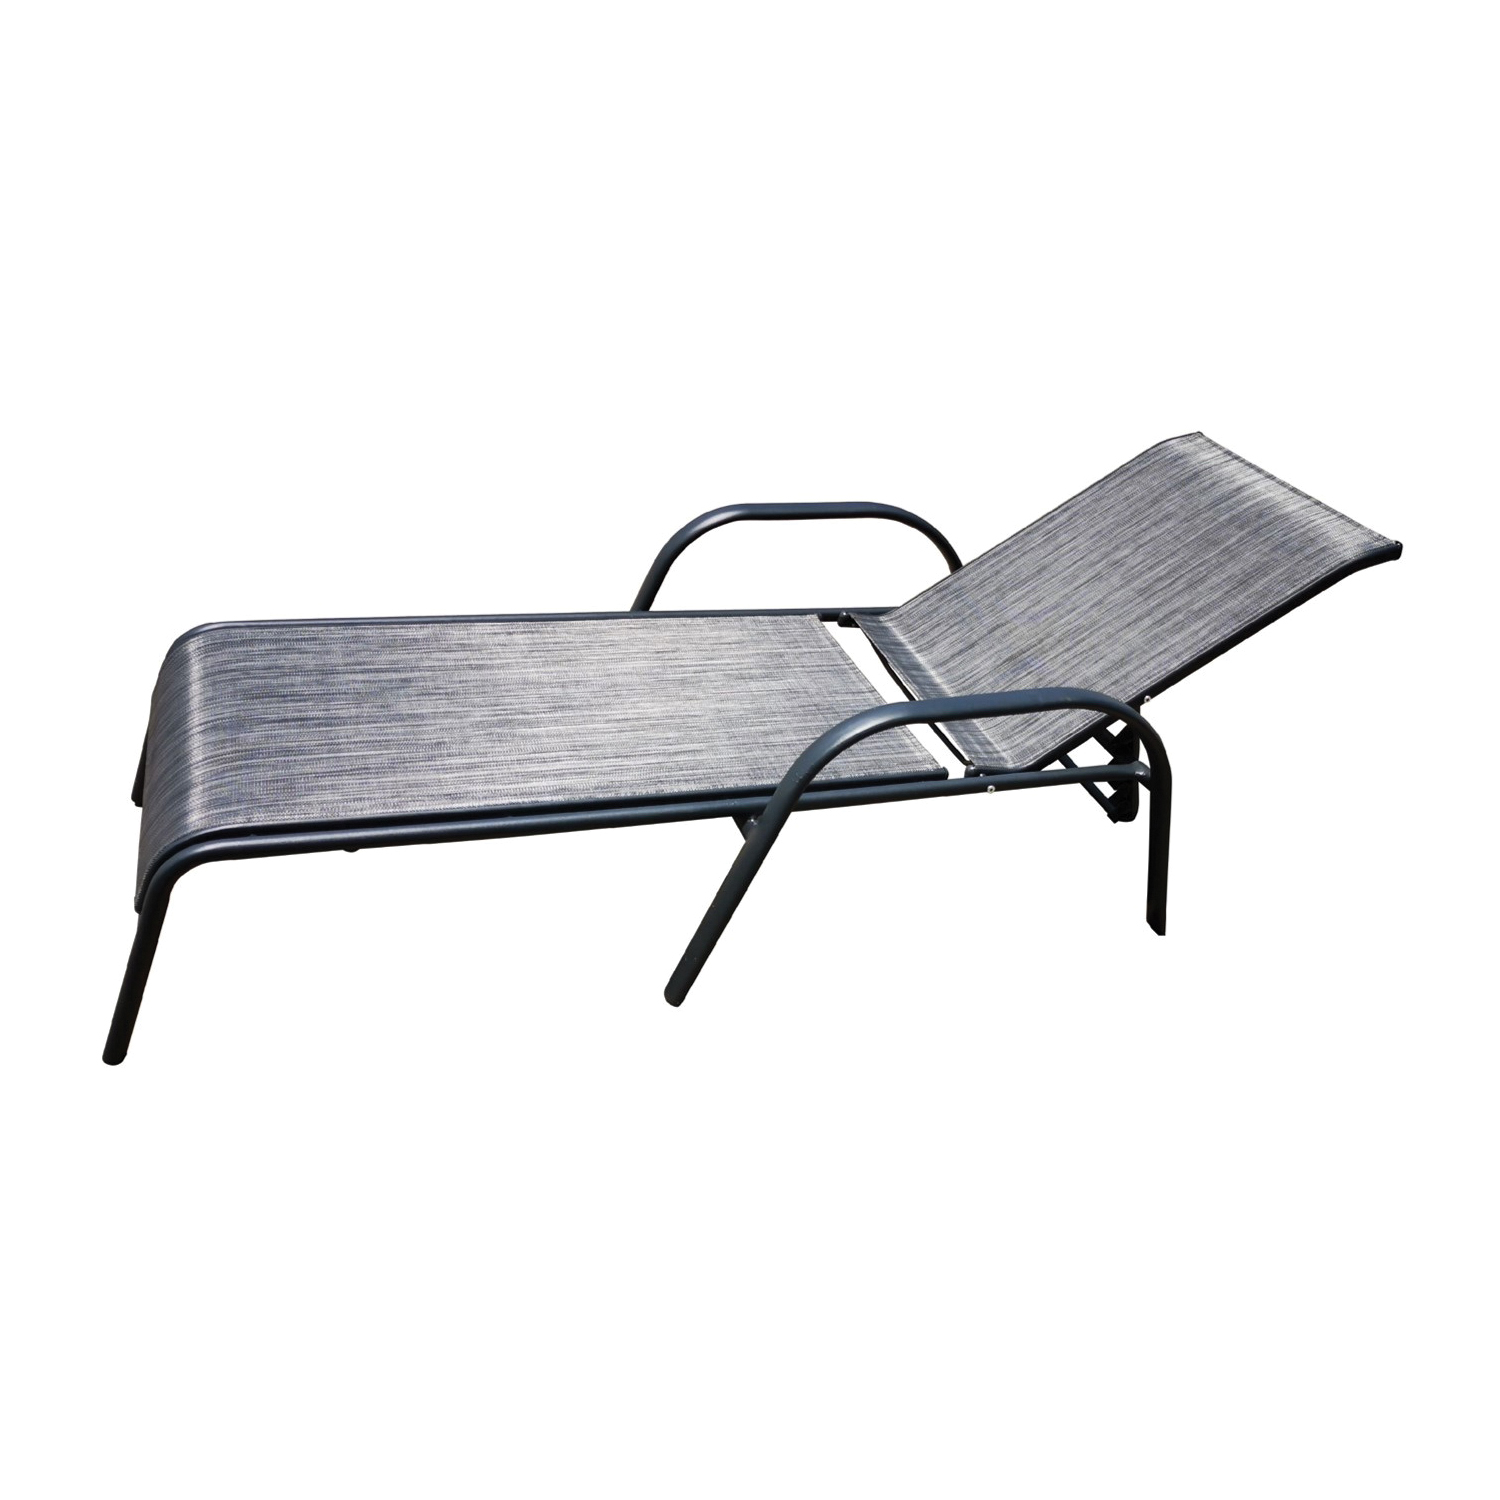 50667 Chaise Lounge, 25.59 in W, 37.4 in H, Grey Textiline Seat, Steel Powder Coated Frame